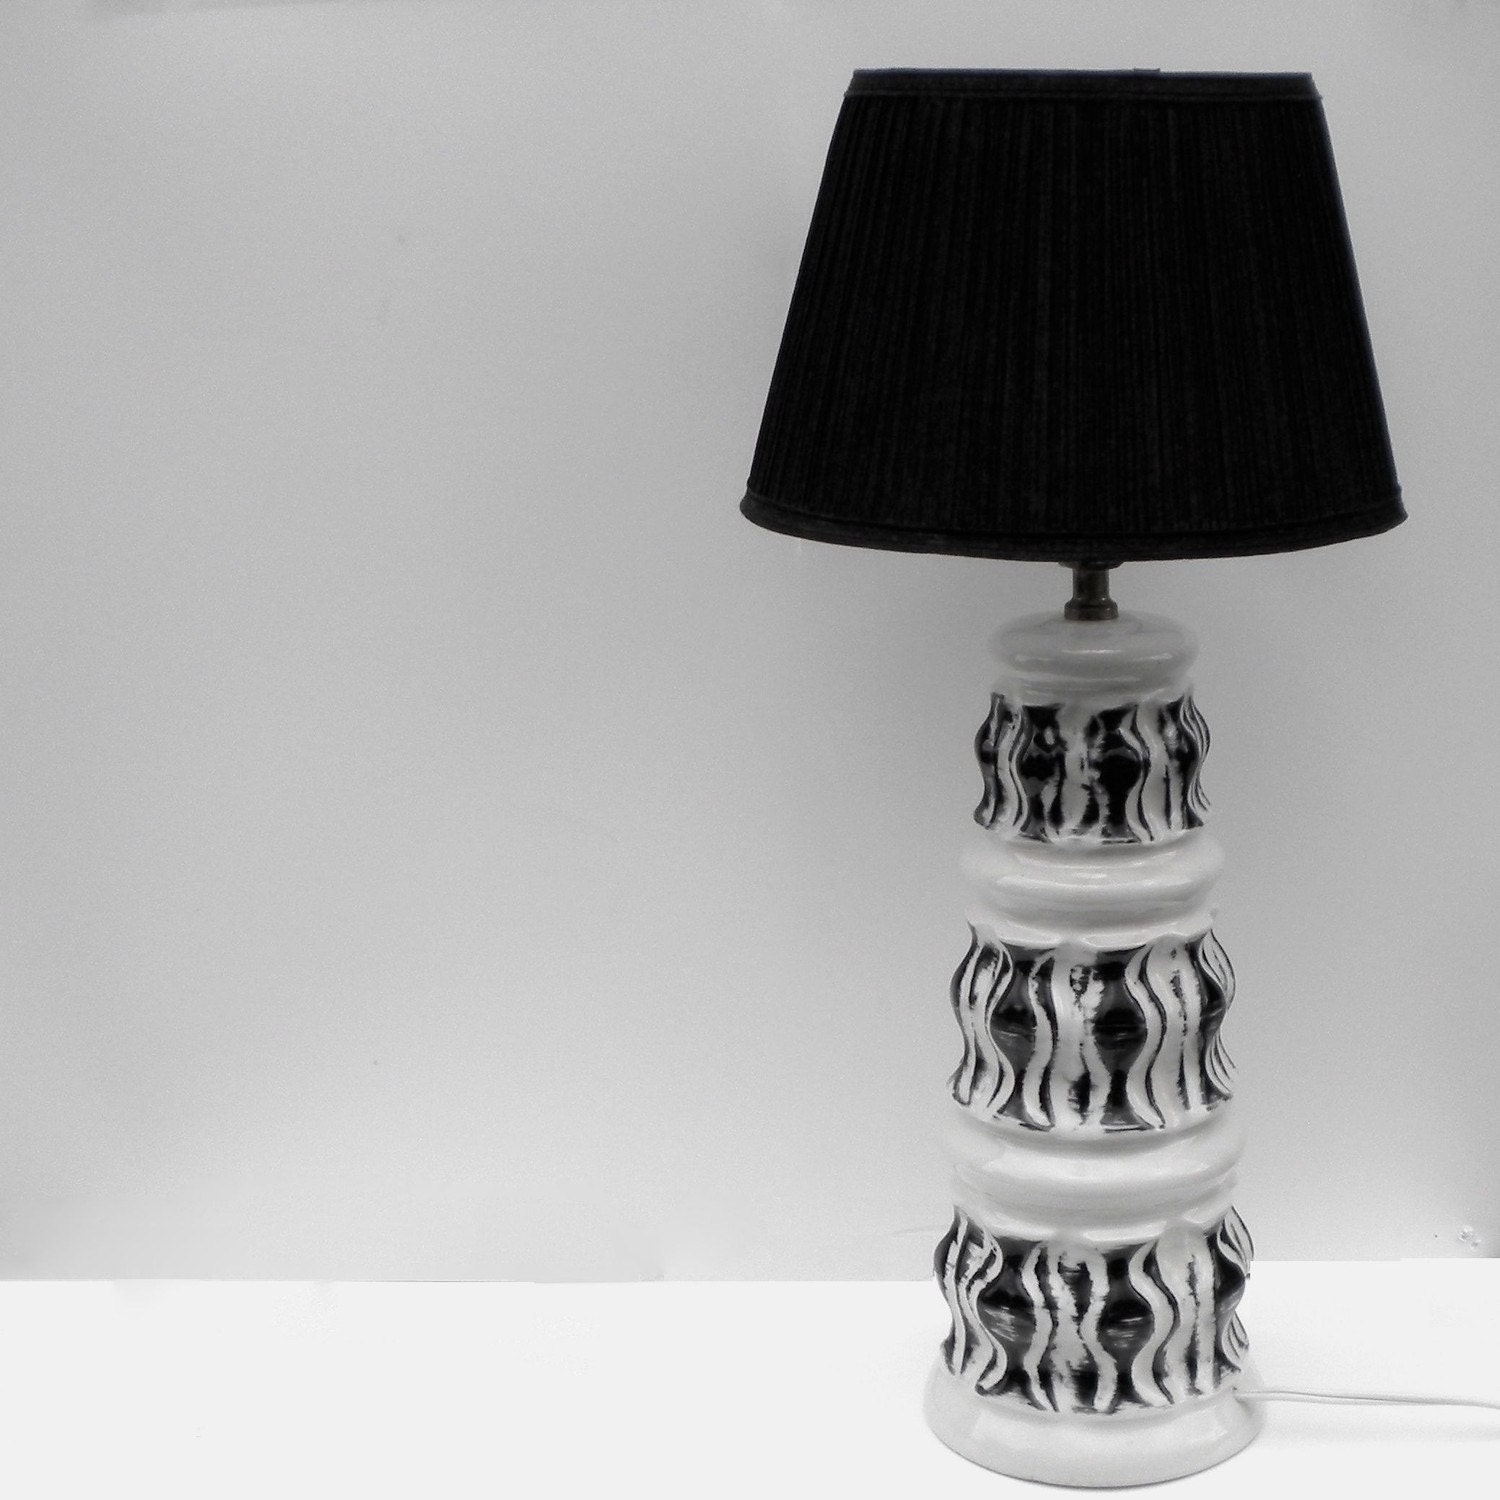 Vintage Black and White Mod Lamp - greenhomeroad